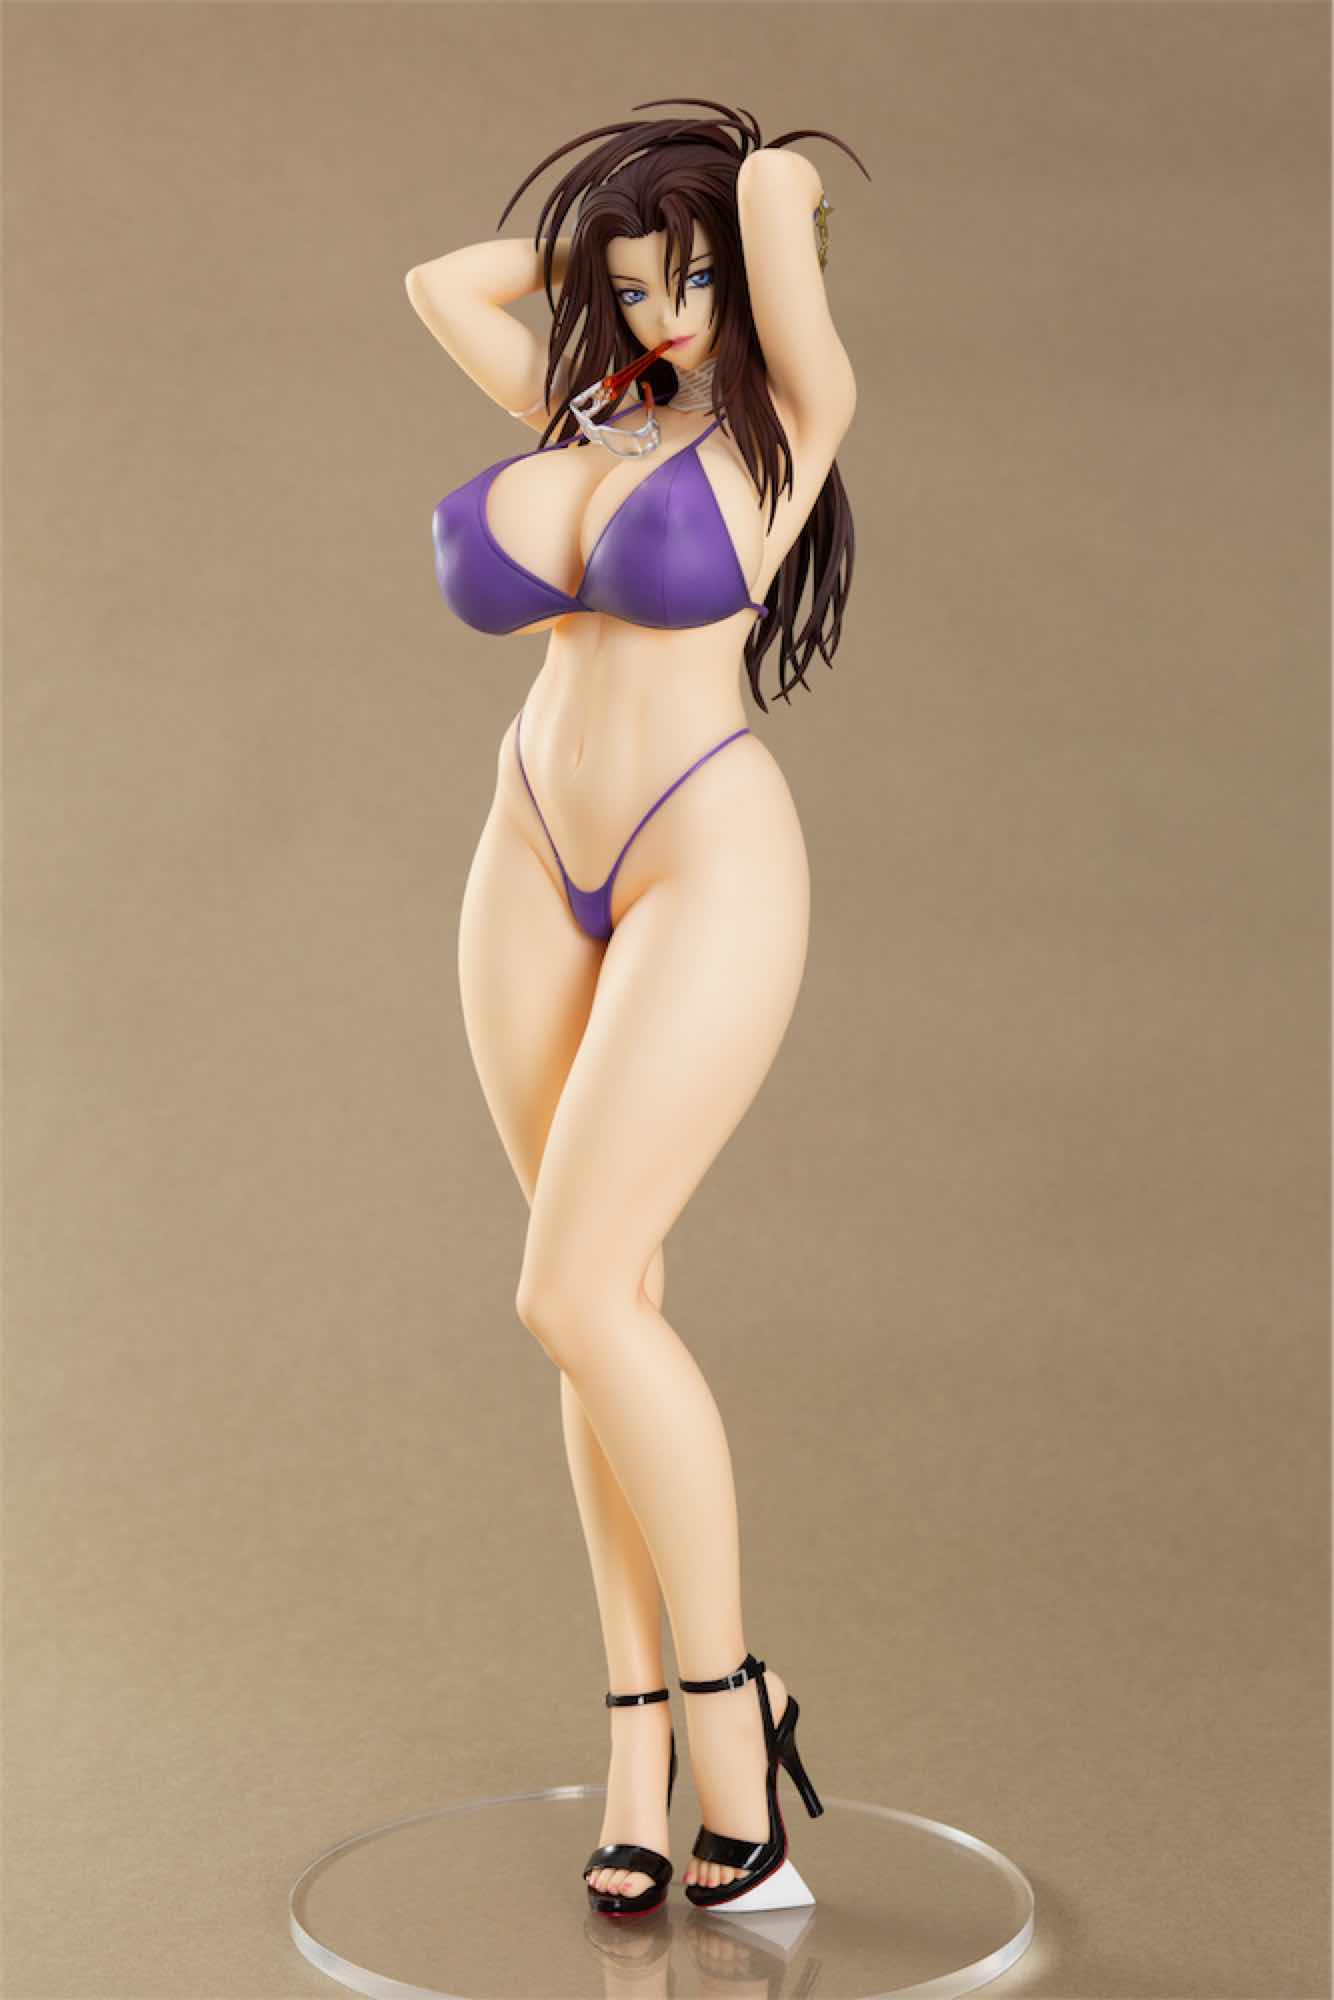 INFINITY2 COVER LADY FIG 35 CM CHICHINOE 1/5 SCALE